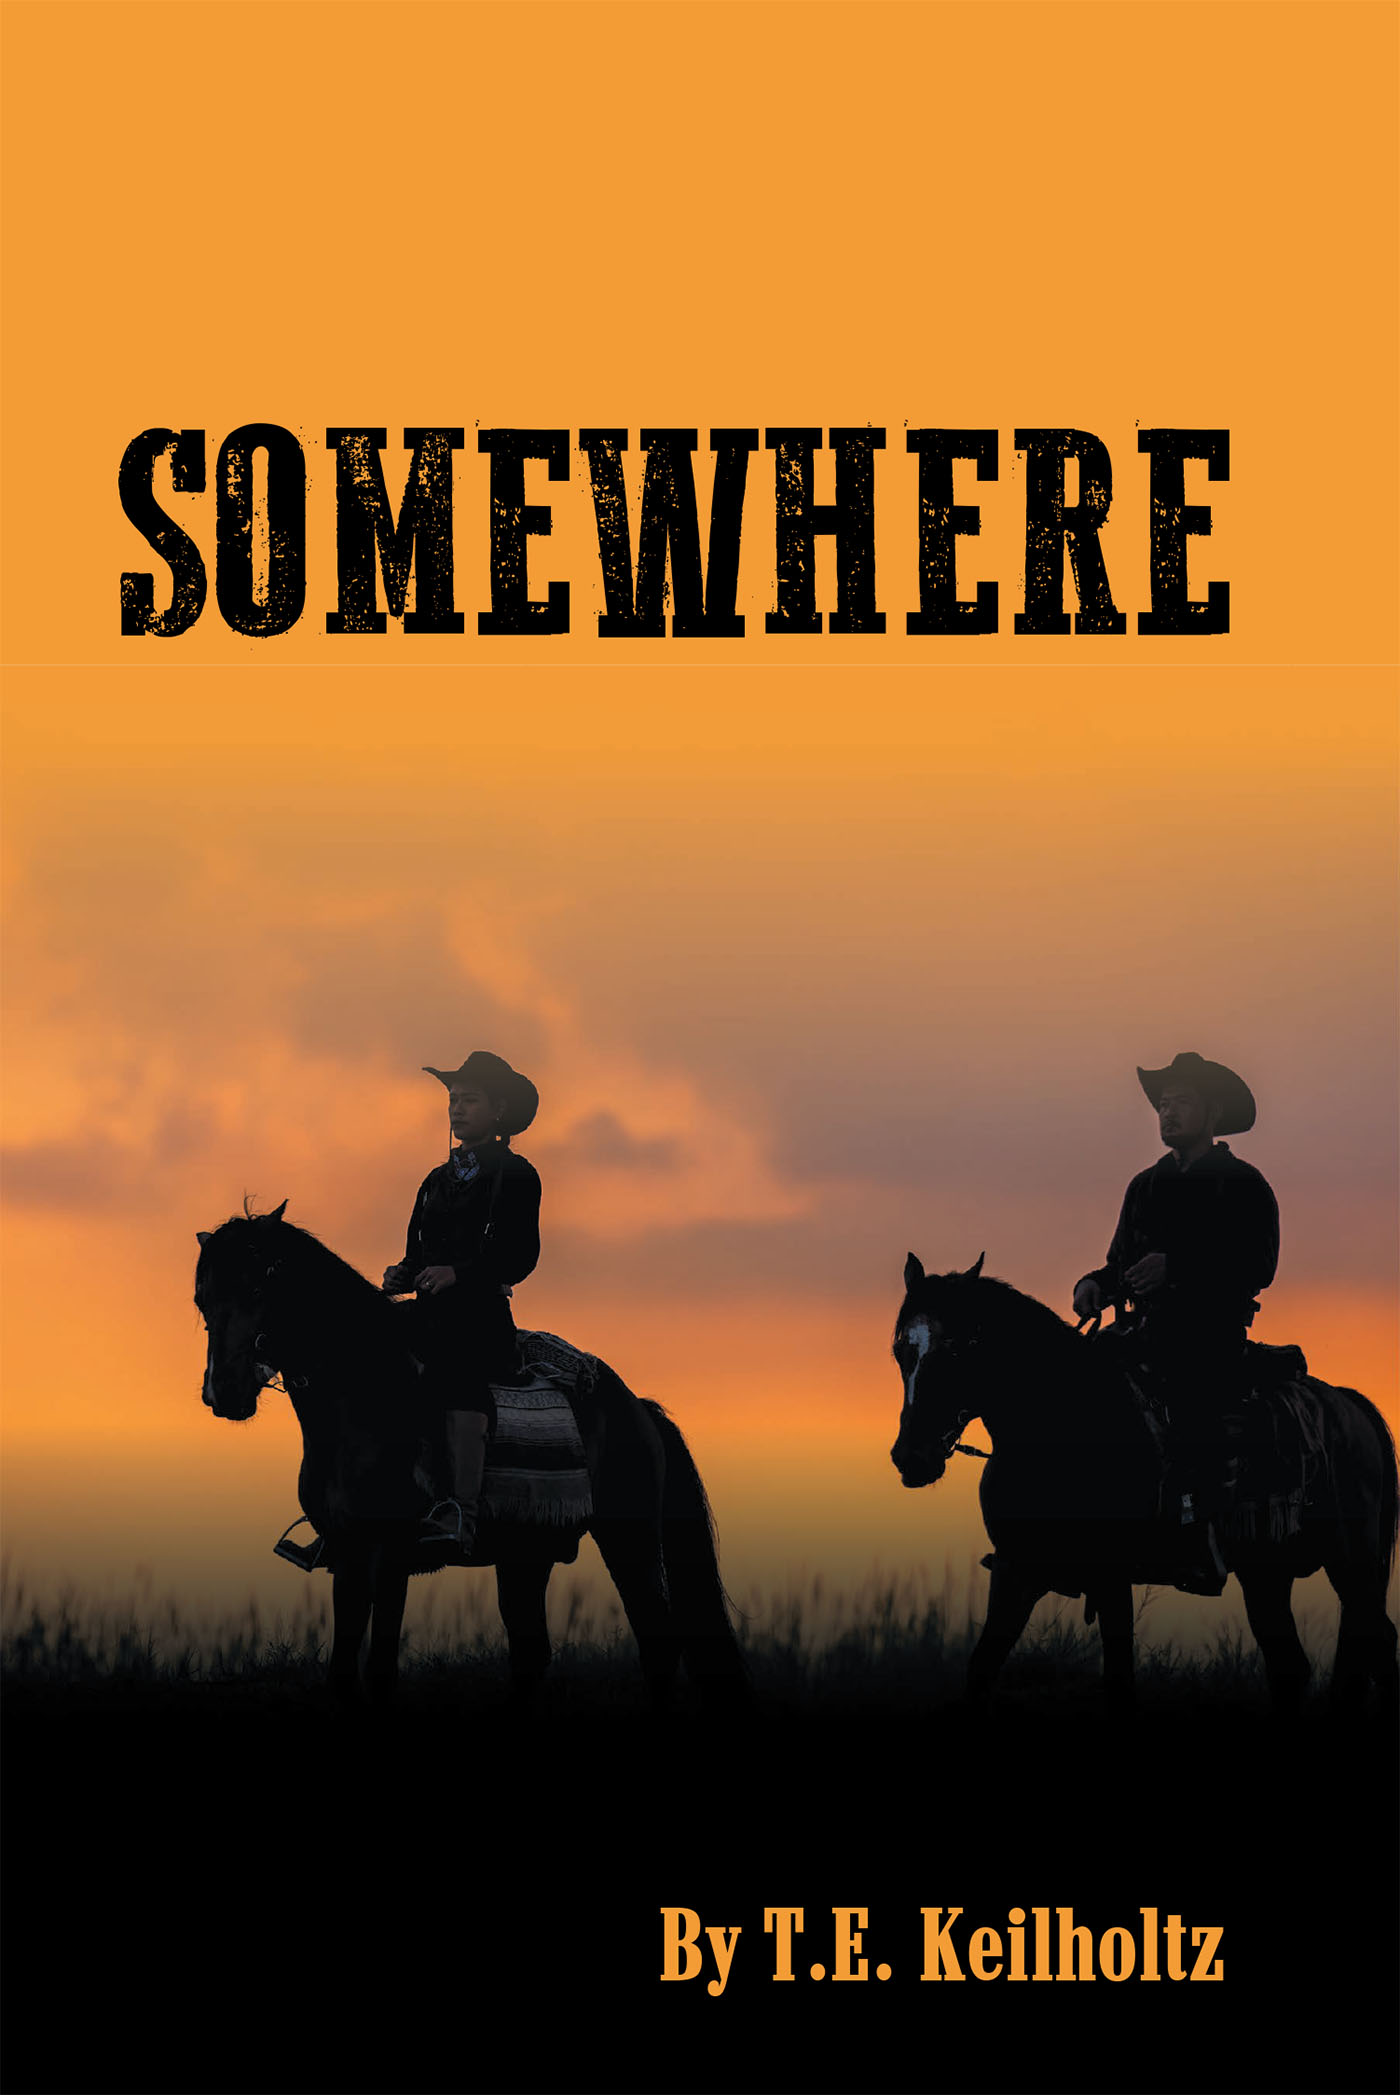 T.E. Keilholtz’s New Book, “Somewhere,” is a Captivating Novel That Follows an Ex-Soldier as He Heads Out West in Order to Leave Behind the Trauma of the Civil War